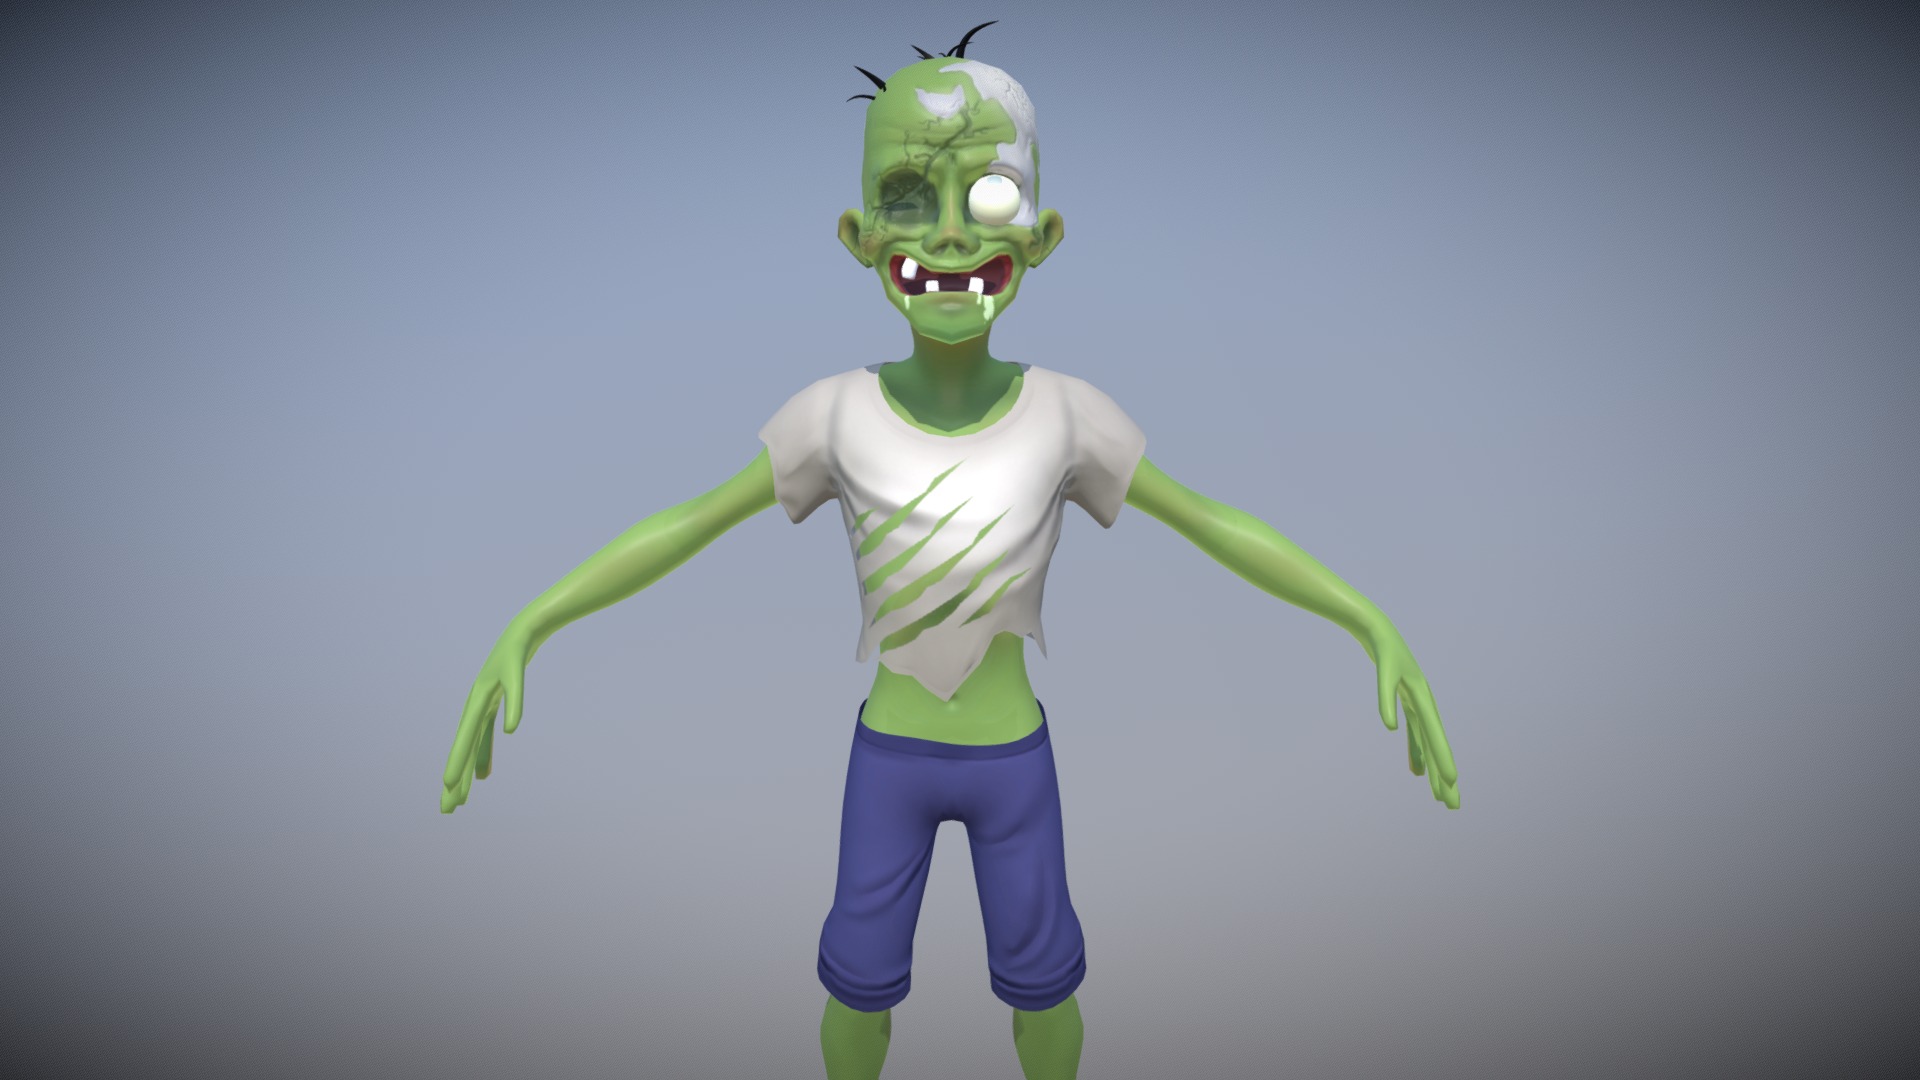 Stylized Low Poly Zombie 3d Model By Chase Morello Chaosanimations [d69eeb2] Sketchfab